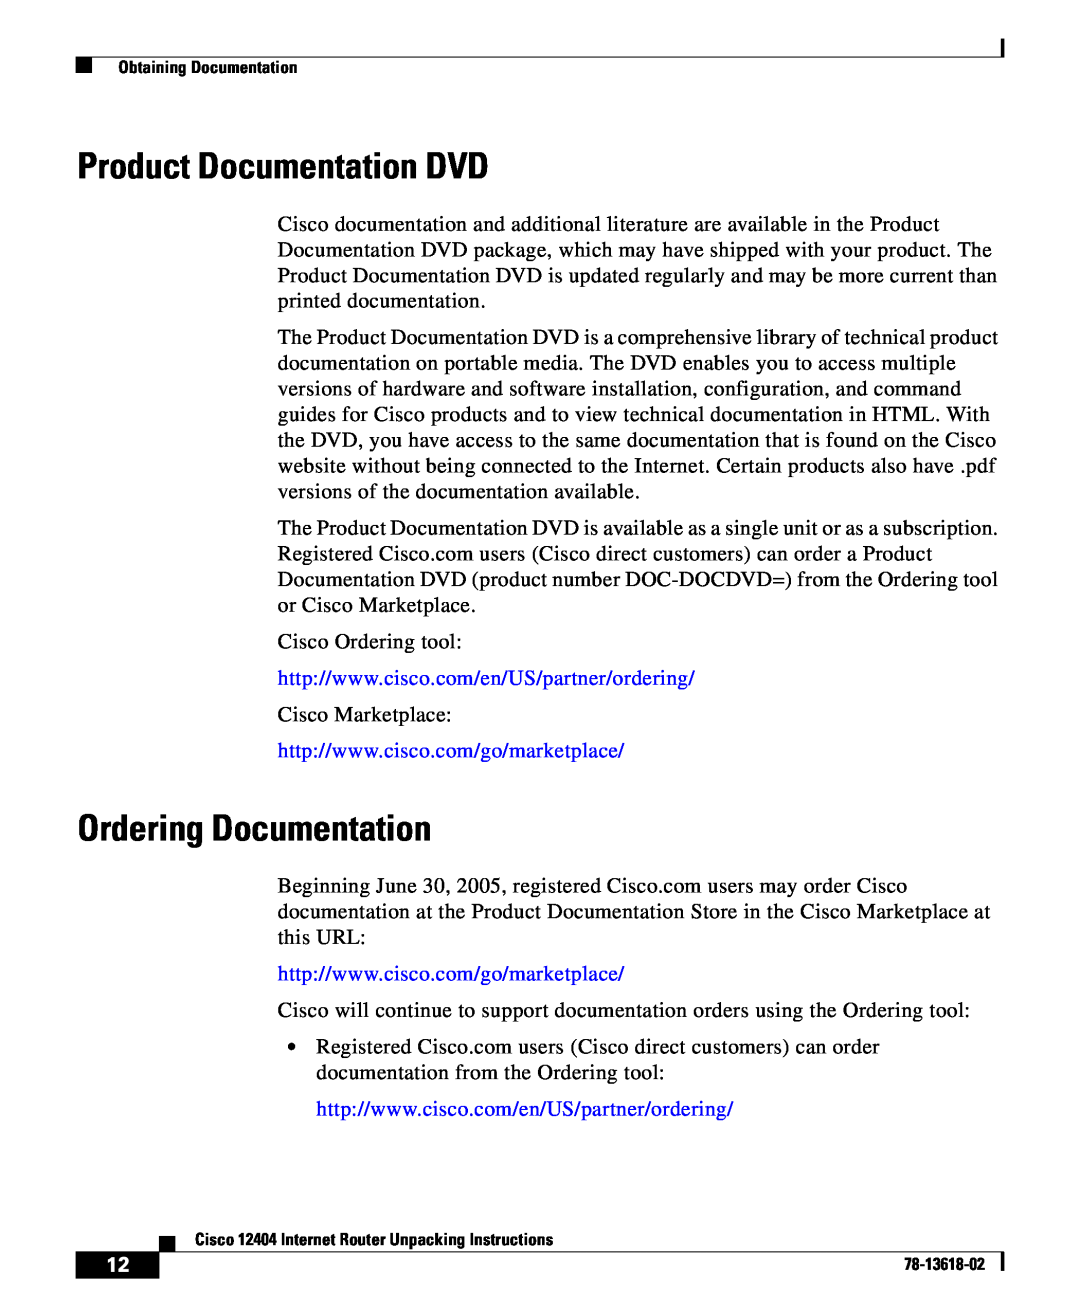 Cisco Systems 12404 manual Product Documentation DVD, Ordering Documentation 